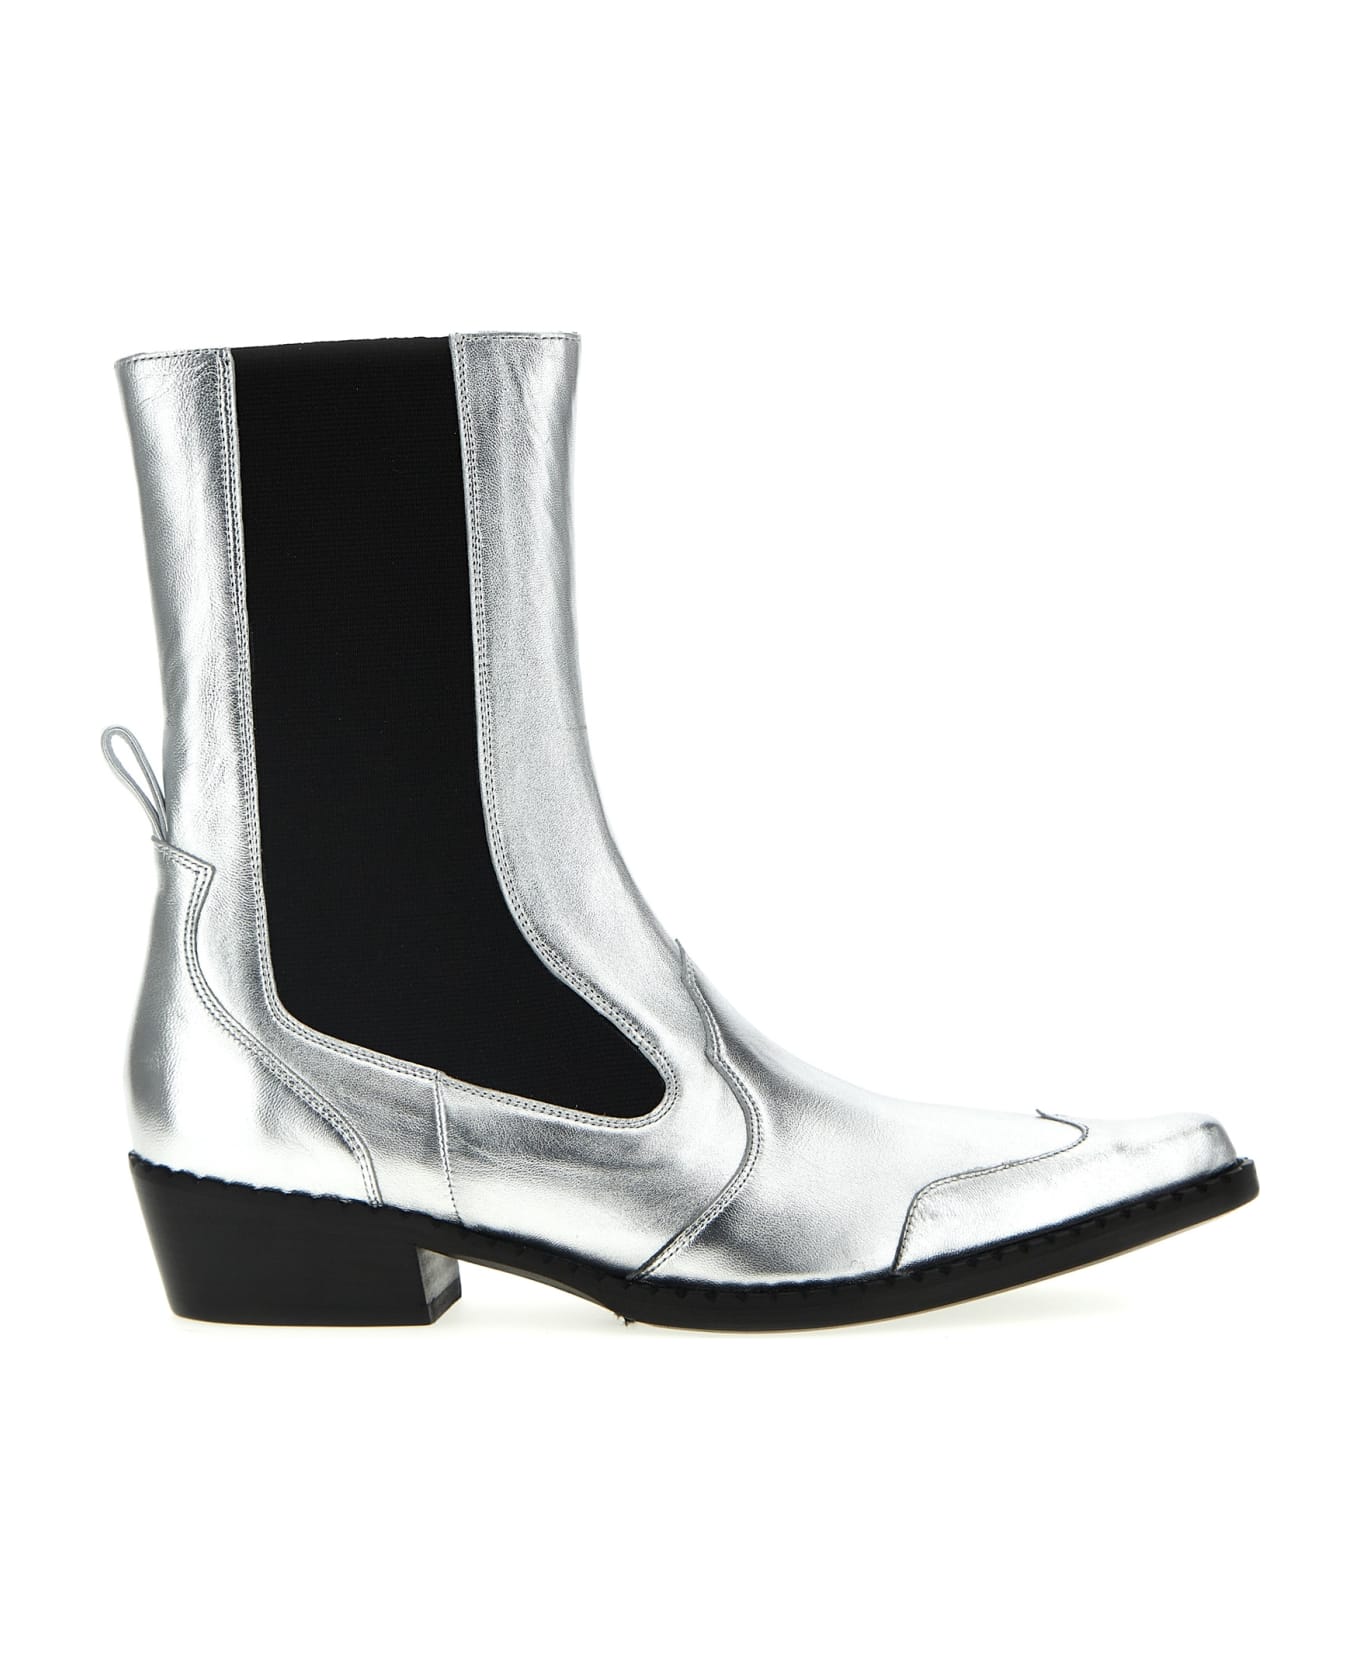 BY FAR 'otis' Ankle Boots - Silver ブーツ